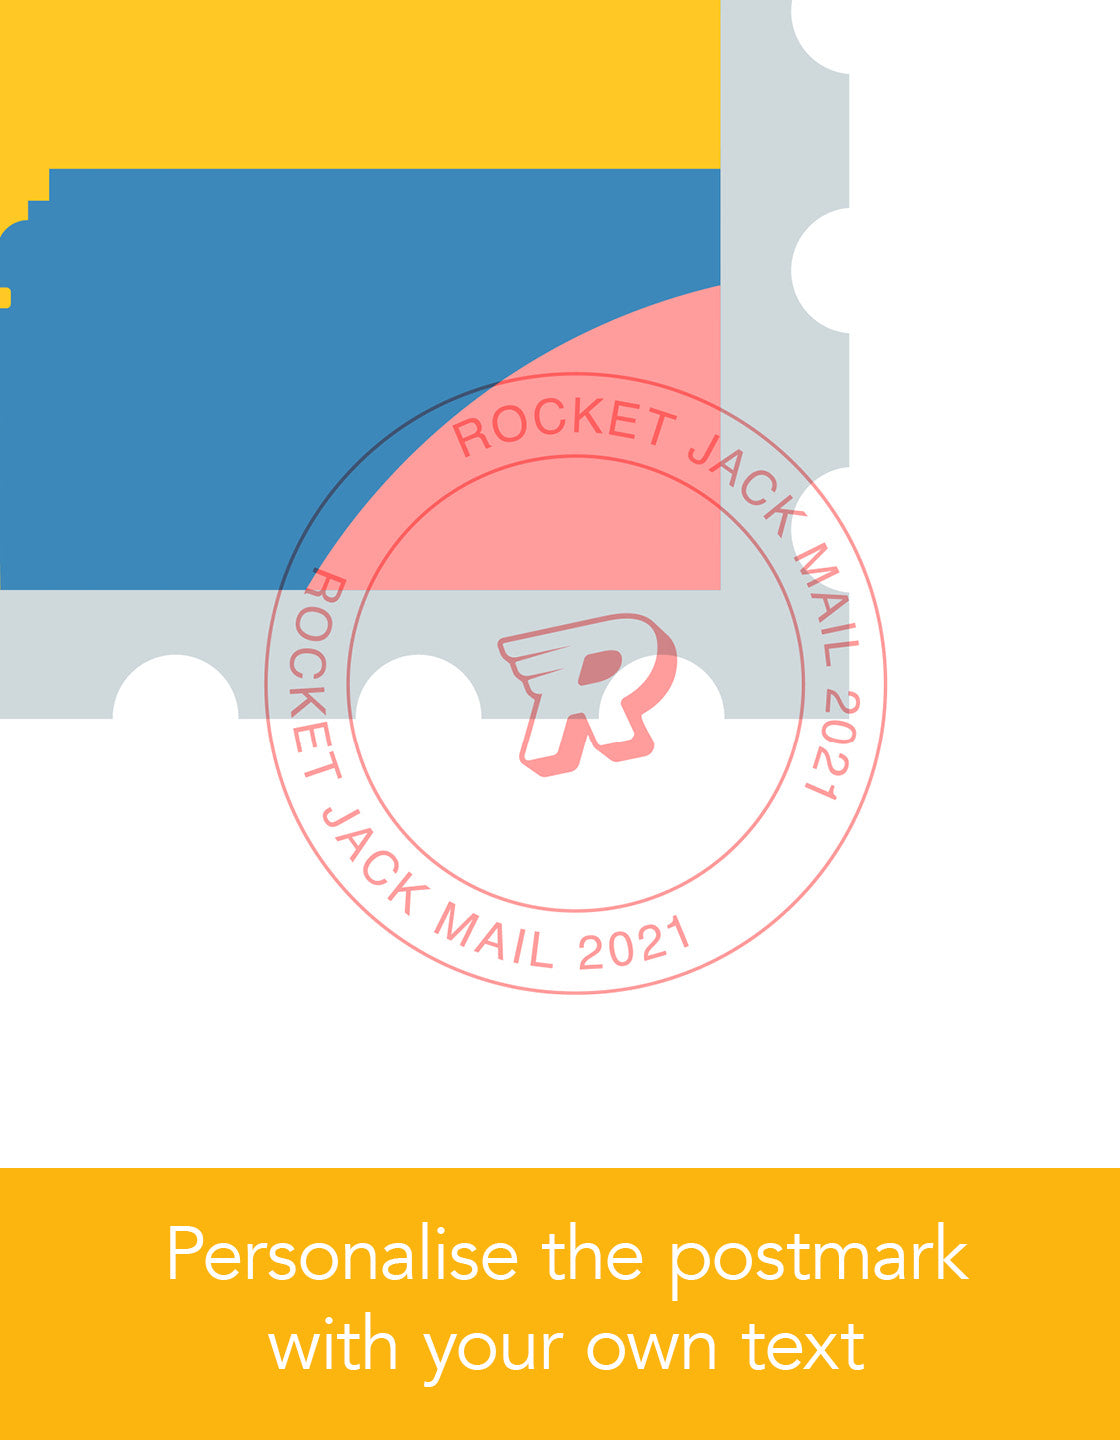 Image shows the customisable watermark which is available for you to personalise with your own text 